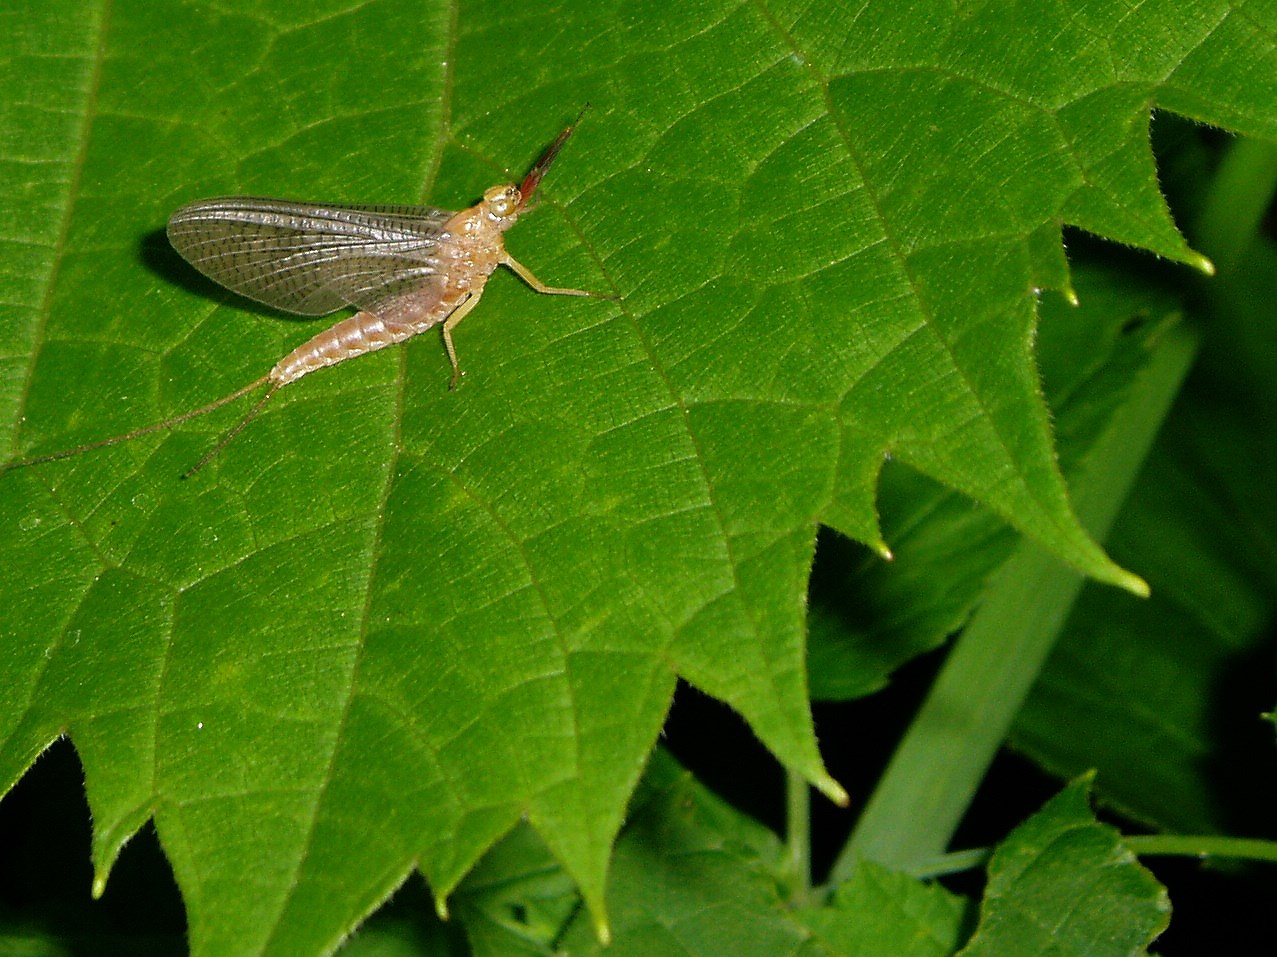 Brown insect on green leaf